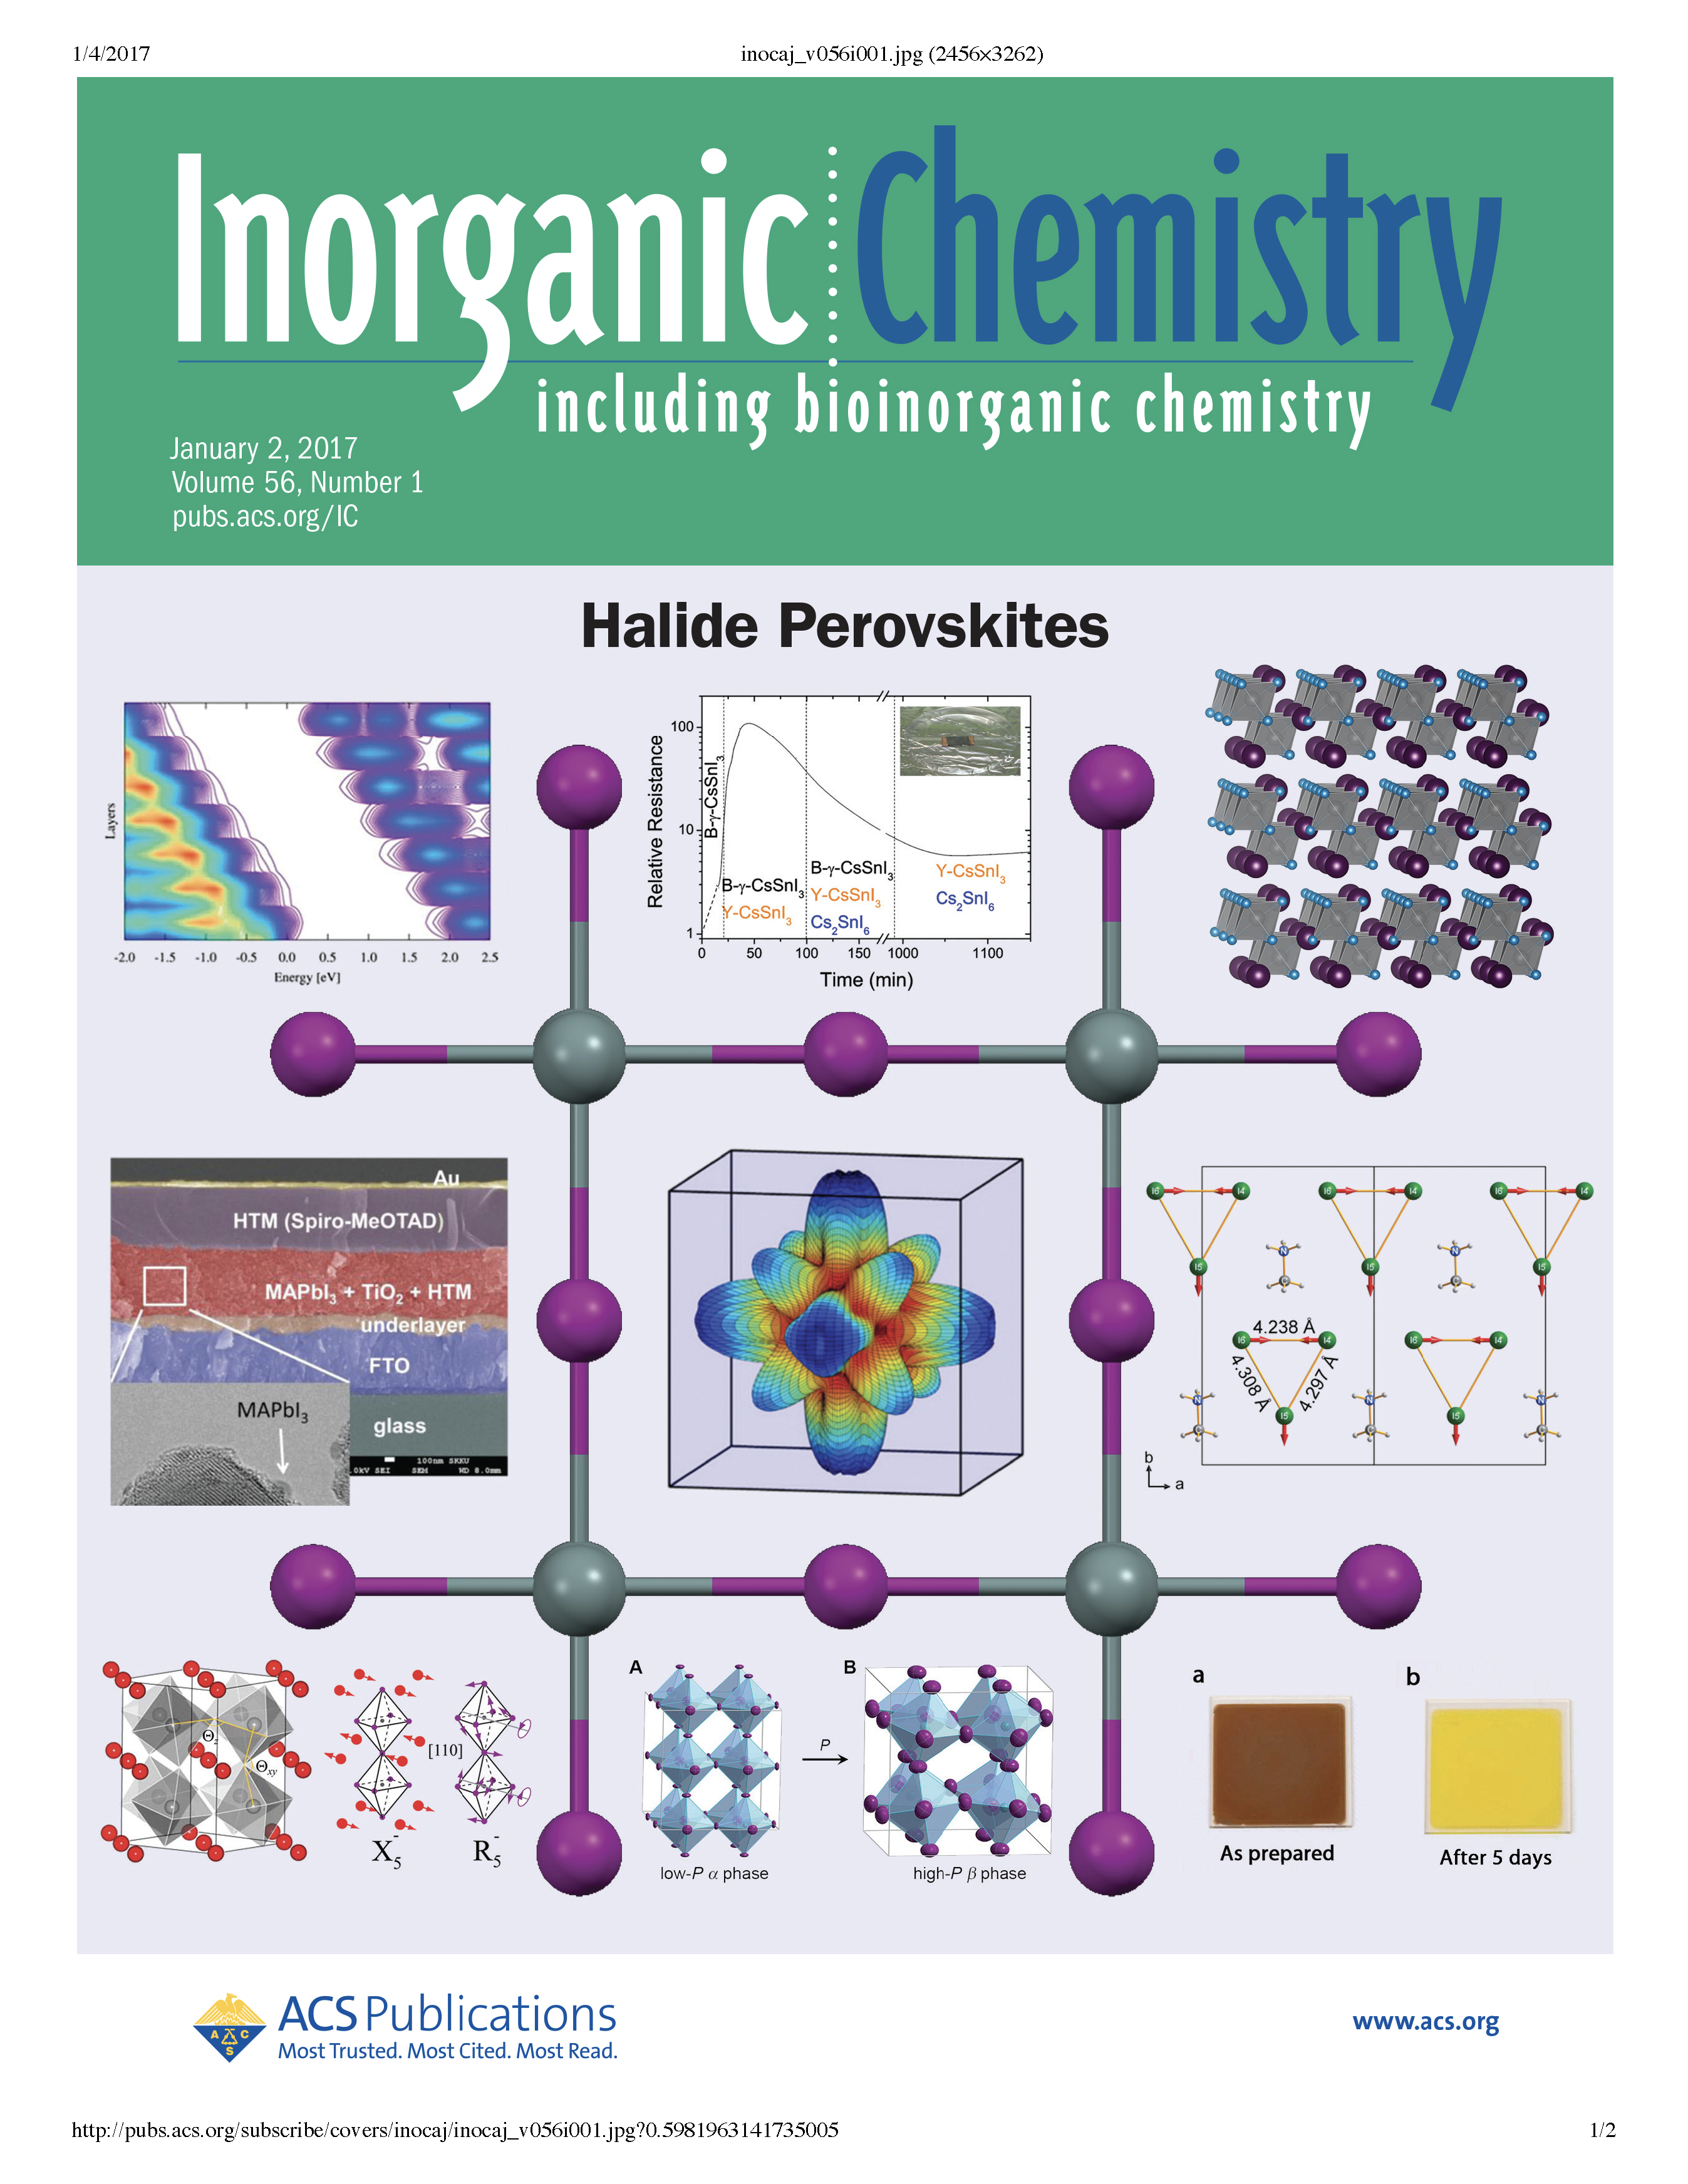 Cover for Inorg. Chem. issue